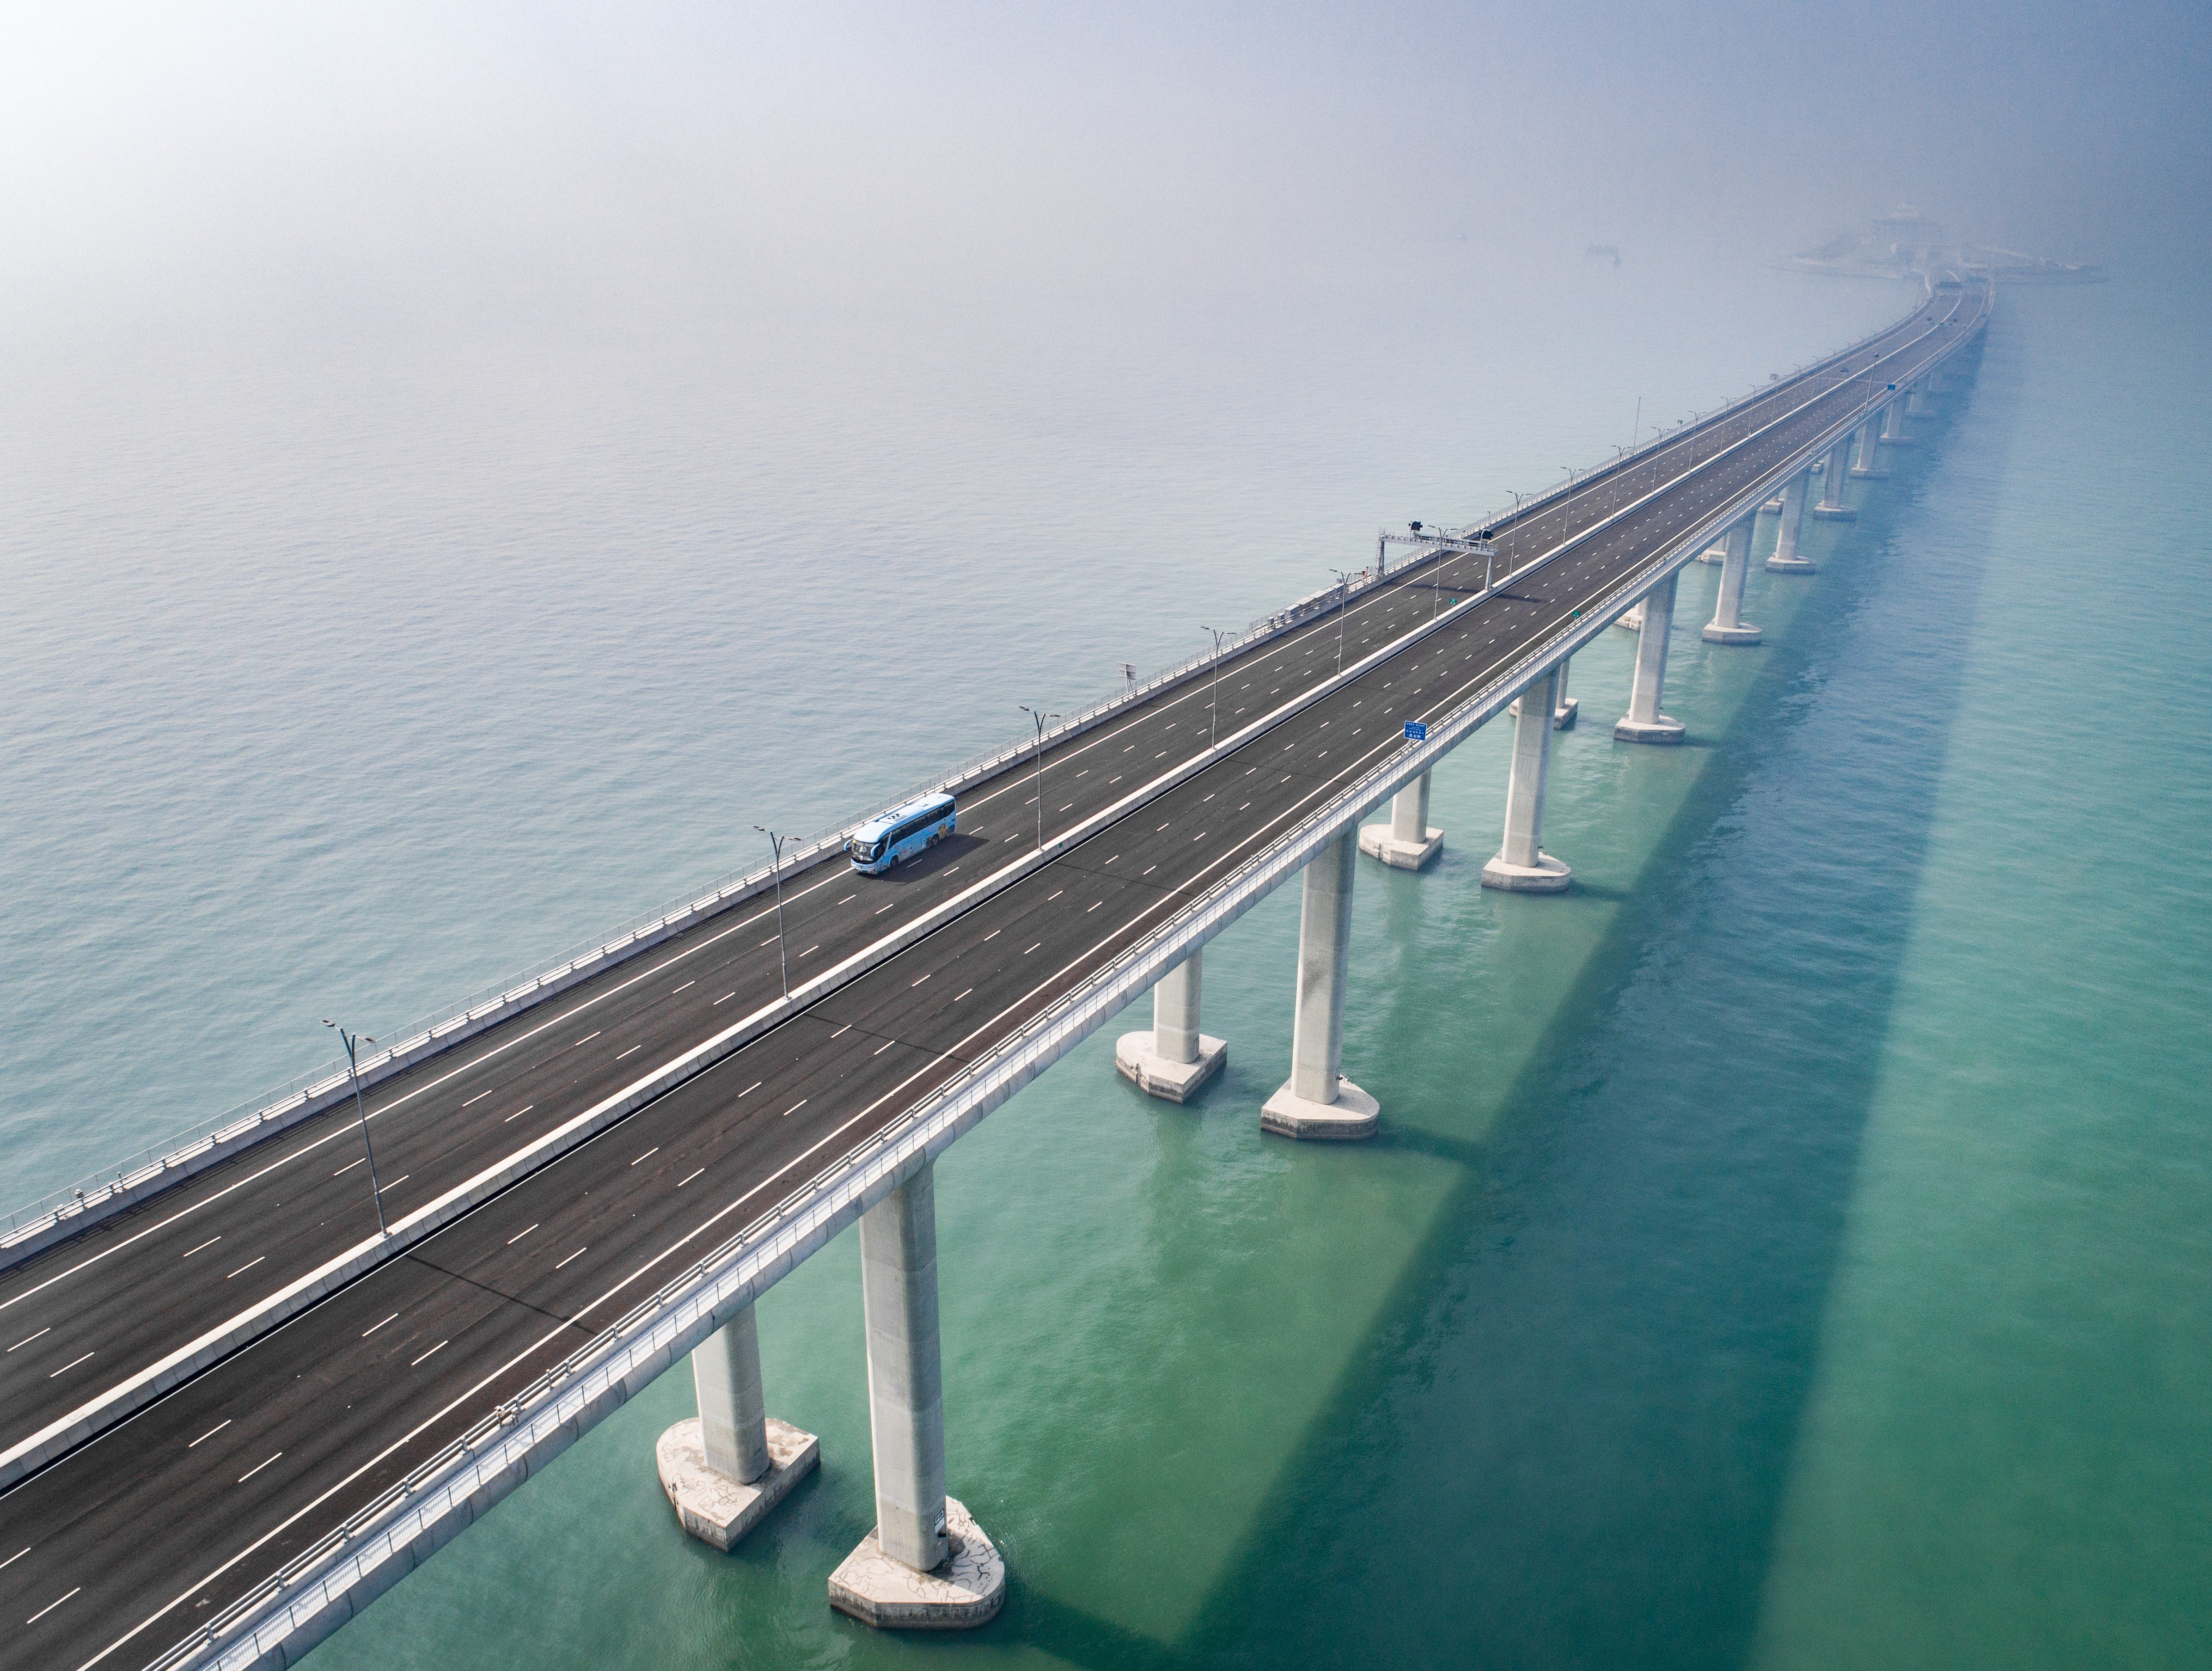 The Hong-Kong-Zhuhai-Macau Bridge photographed by Derry Ainsworth, who says ‘the most beautiful thing about the bridge is the sheer length of it, how it’s so long, it almost fades into the horizon’s image’. Photo: Derry Ainsworth